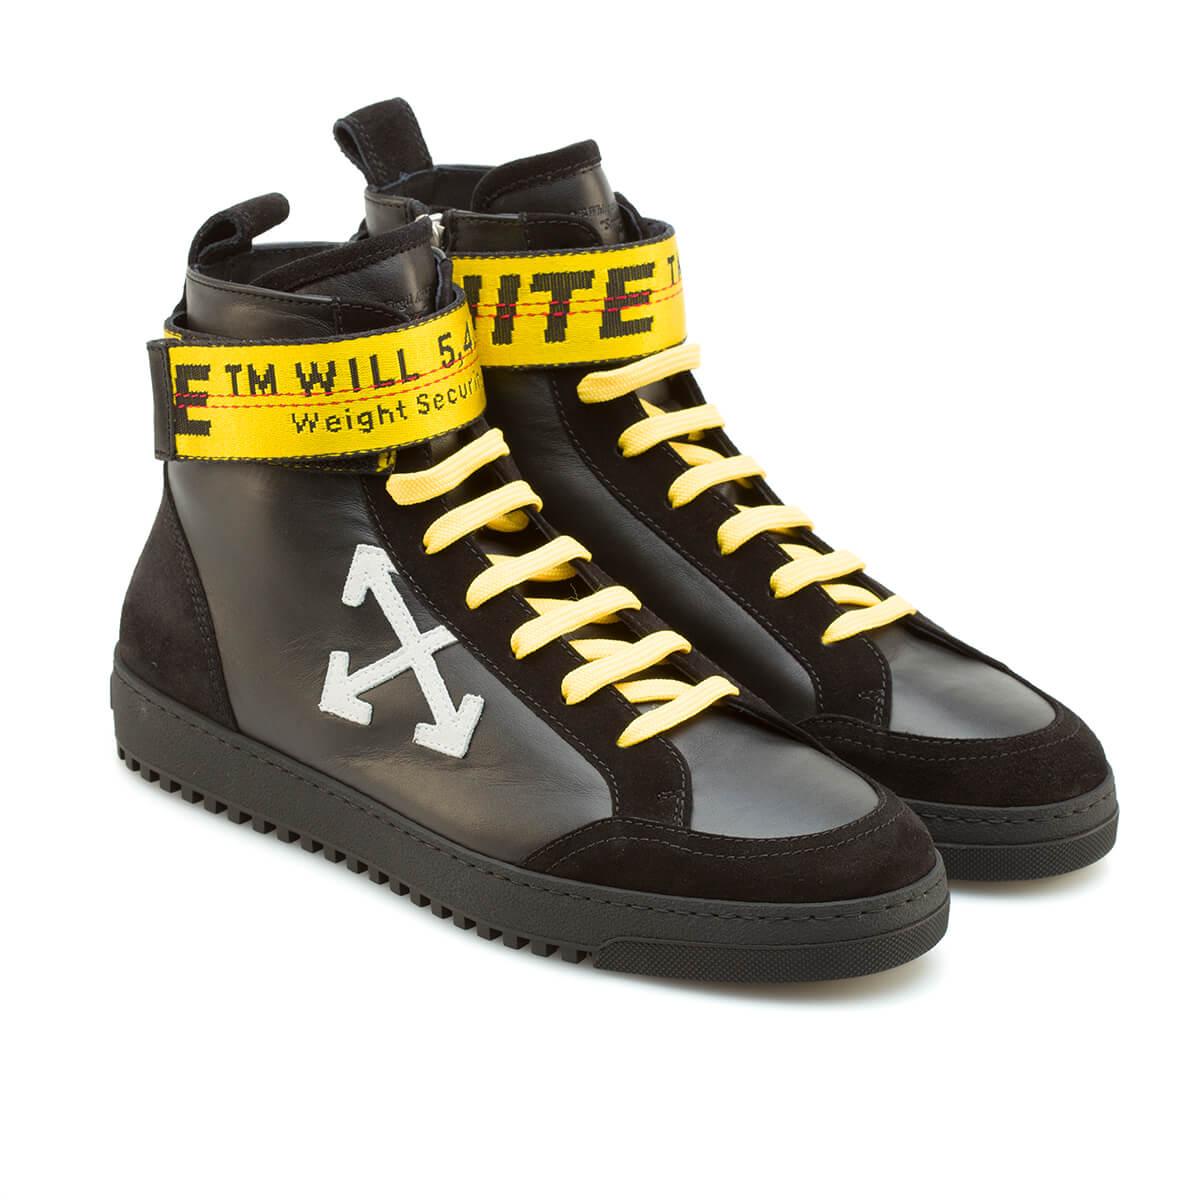 Lyst - Off-White C/O Virgil Abloh High-top Sneakers in Black for Men1200 x 1200